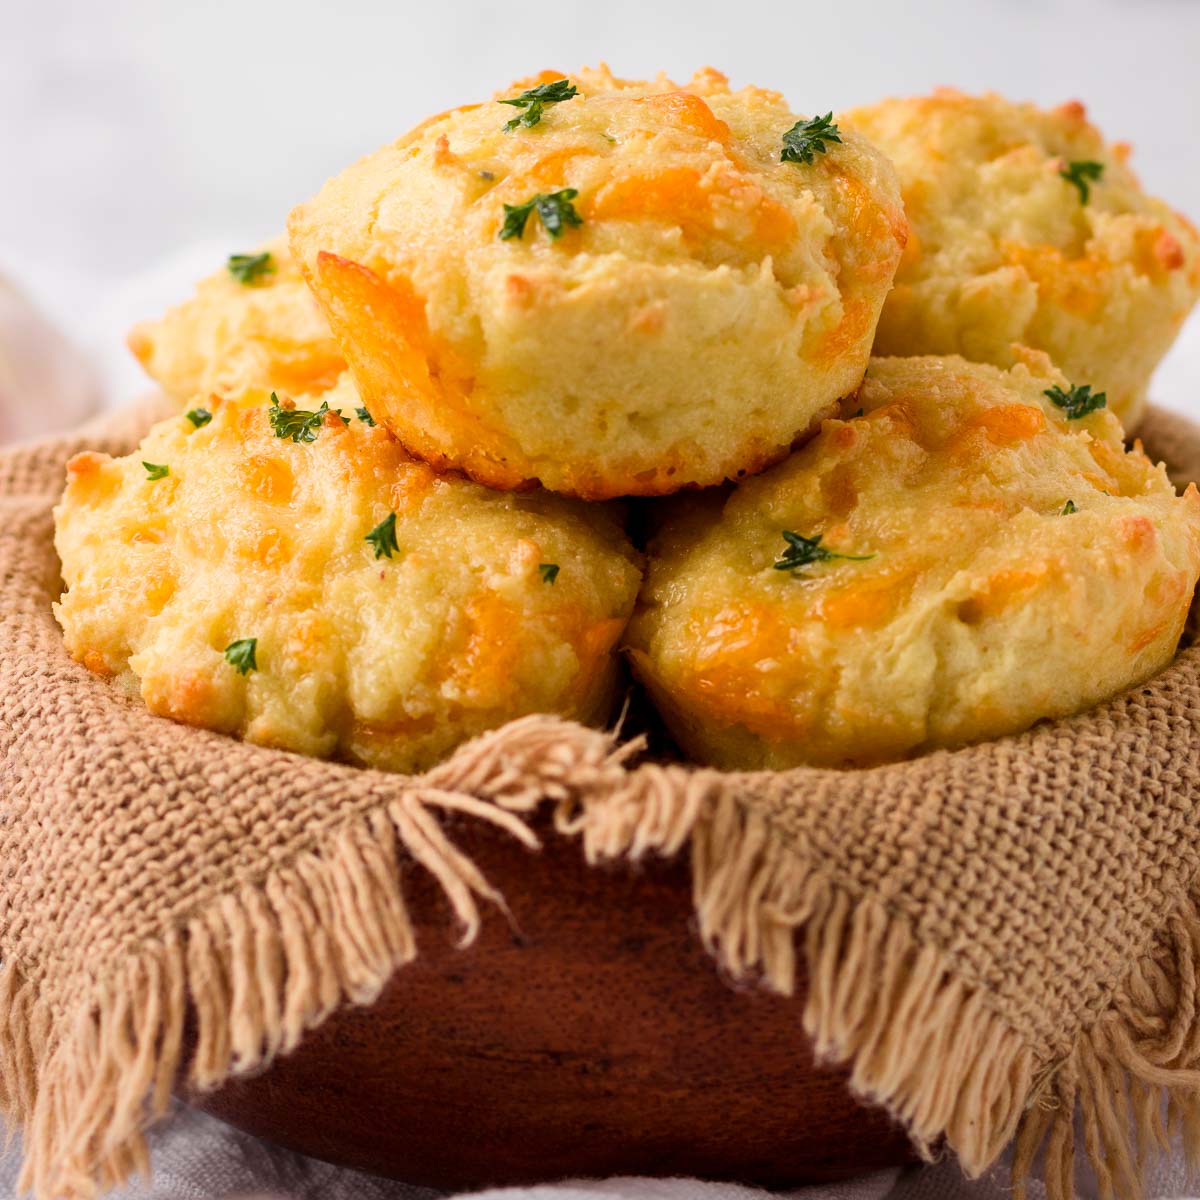 A basket of cheesy garlic biscuits that are low carb.